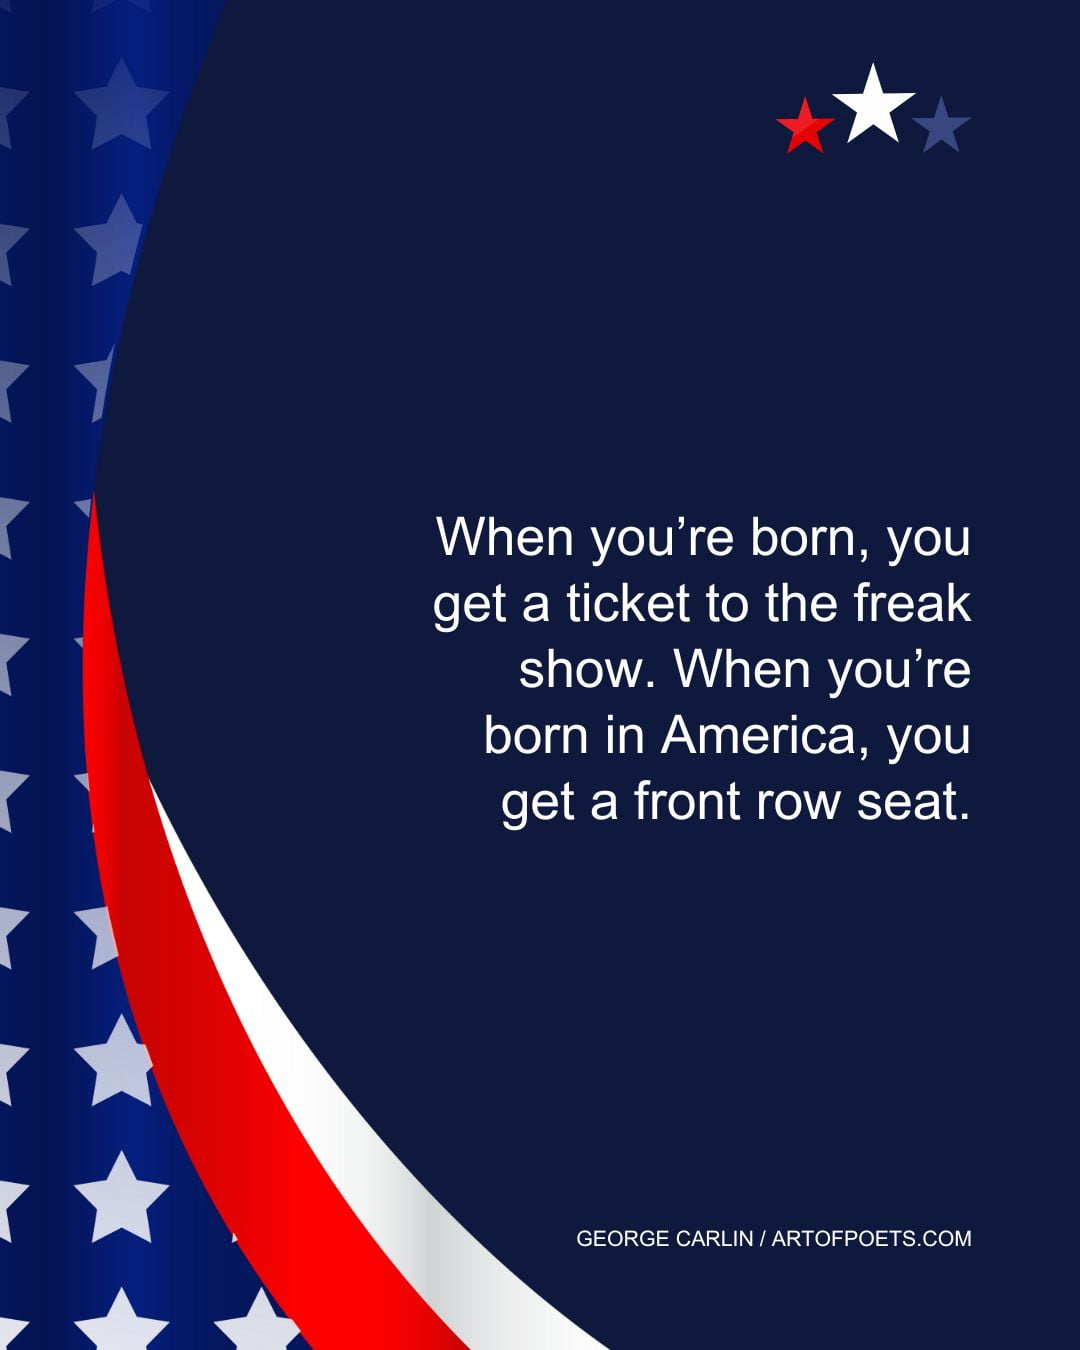 When youre born you get a ticket to the freak show. When youre born in America you get a front row seat